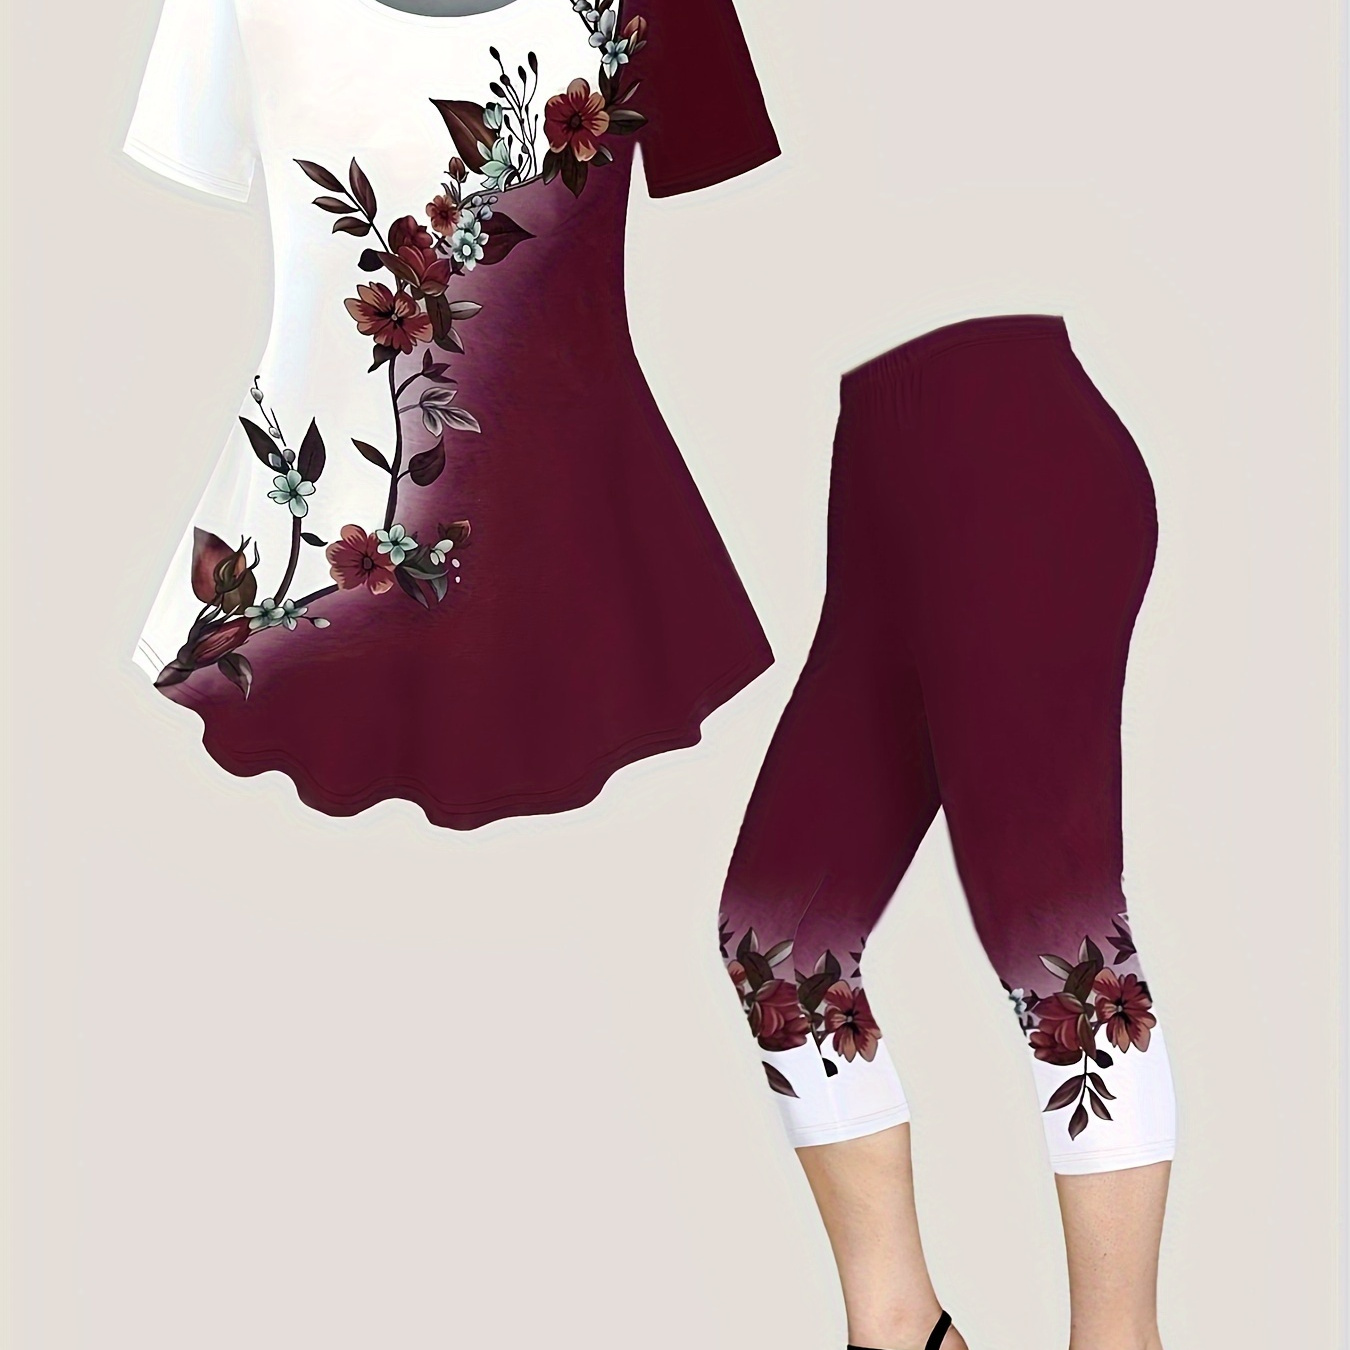 

Floral Print Summer & Spring Casual Two-piece Set, Crew Neck Short Sleeve Top & Slim Pants Outfits, Women's Clothing